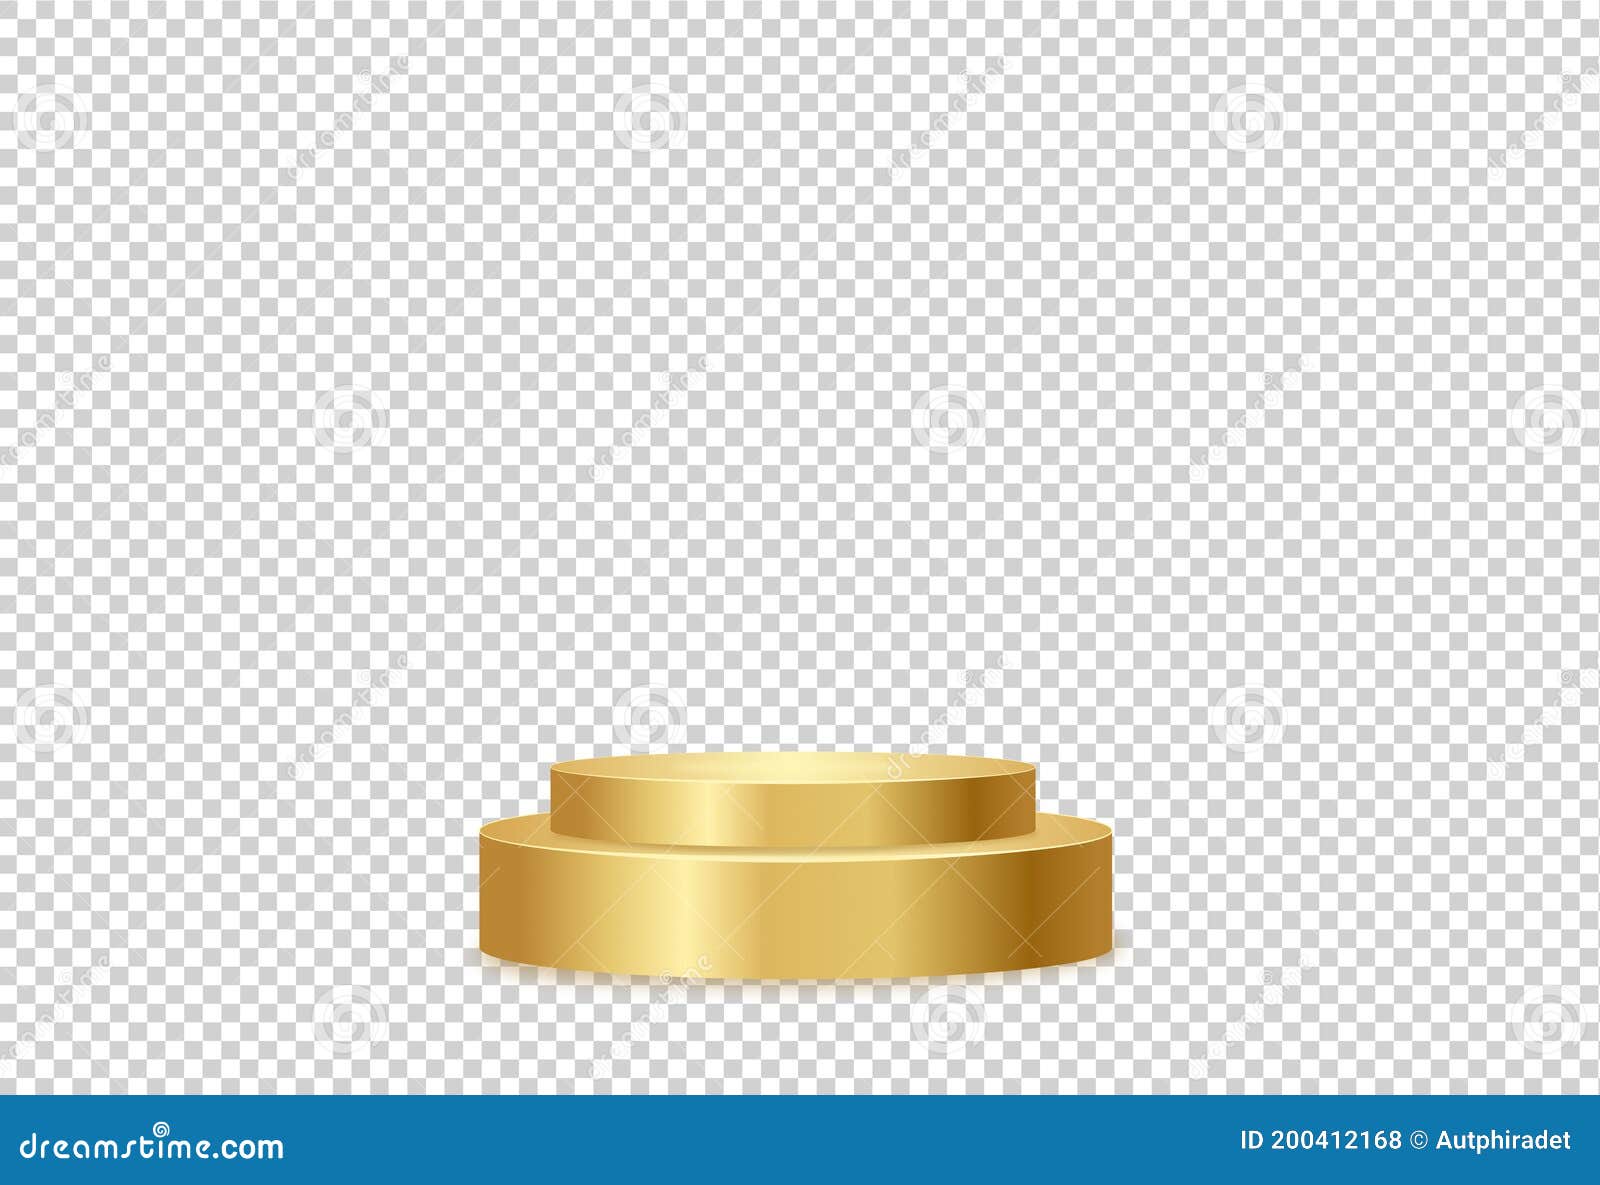 Gold Podium or Showcase To Place Products Isolate on Png or Transparent  Background for New Product, Promotion, Advertising, Stock Vector -  Illustration of festival, design: 200412168